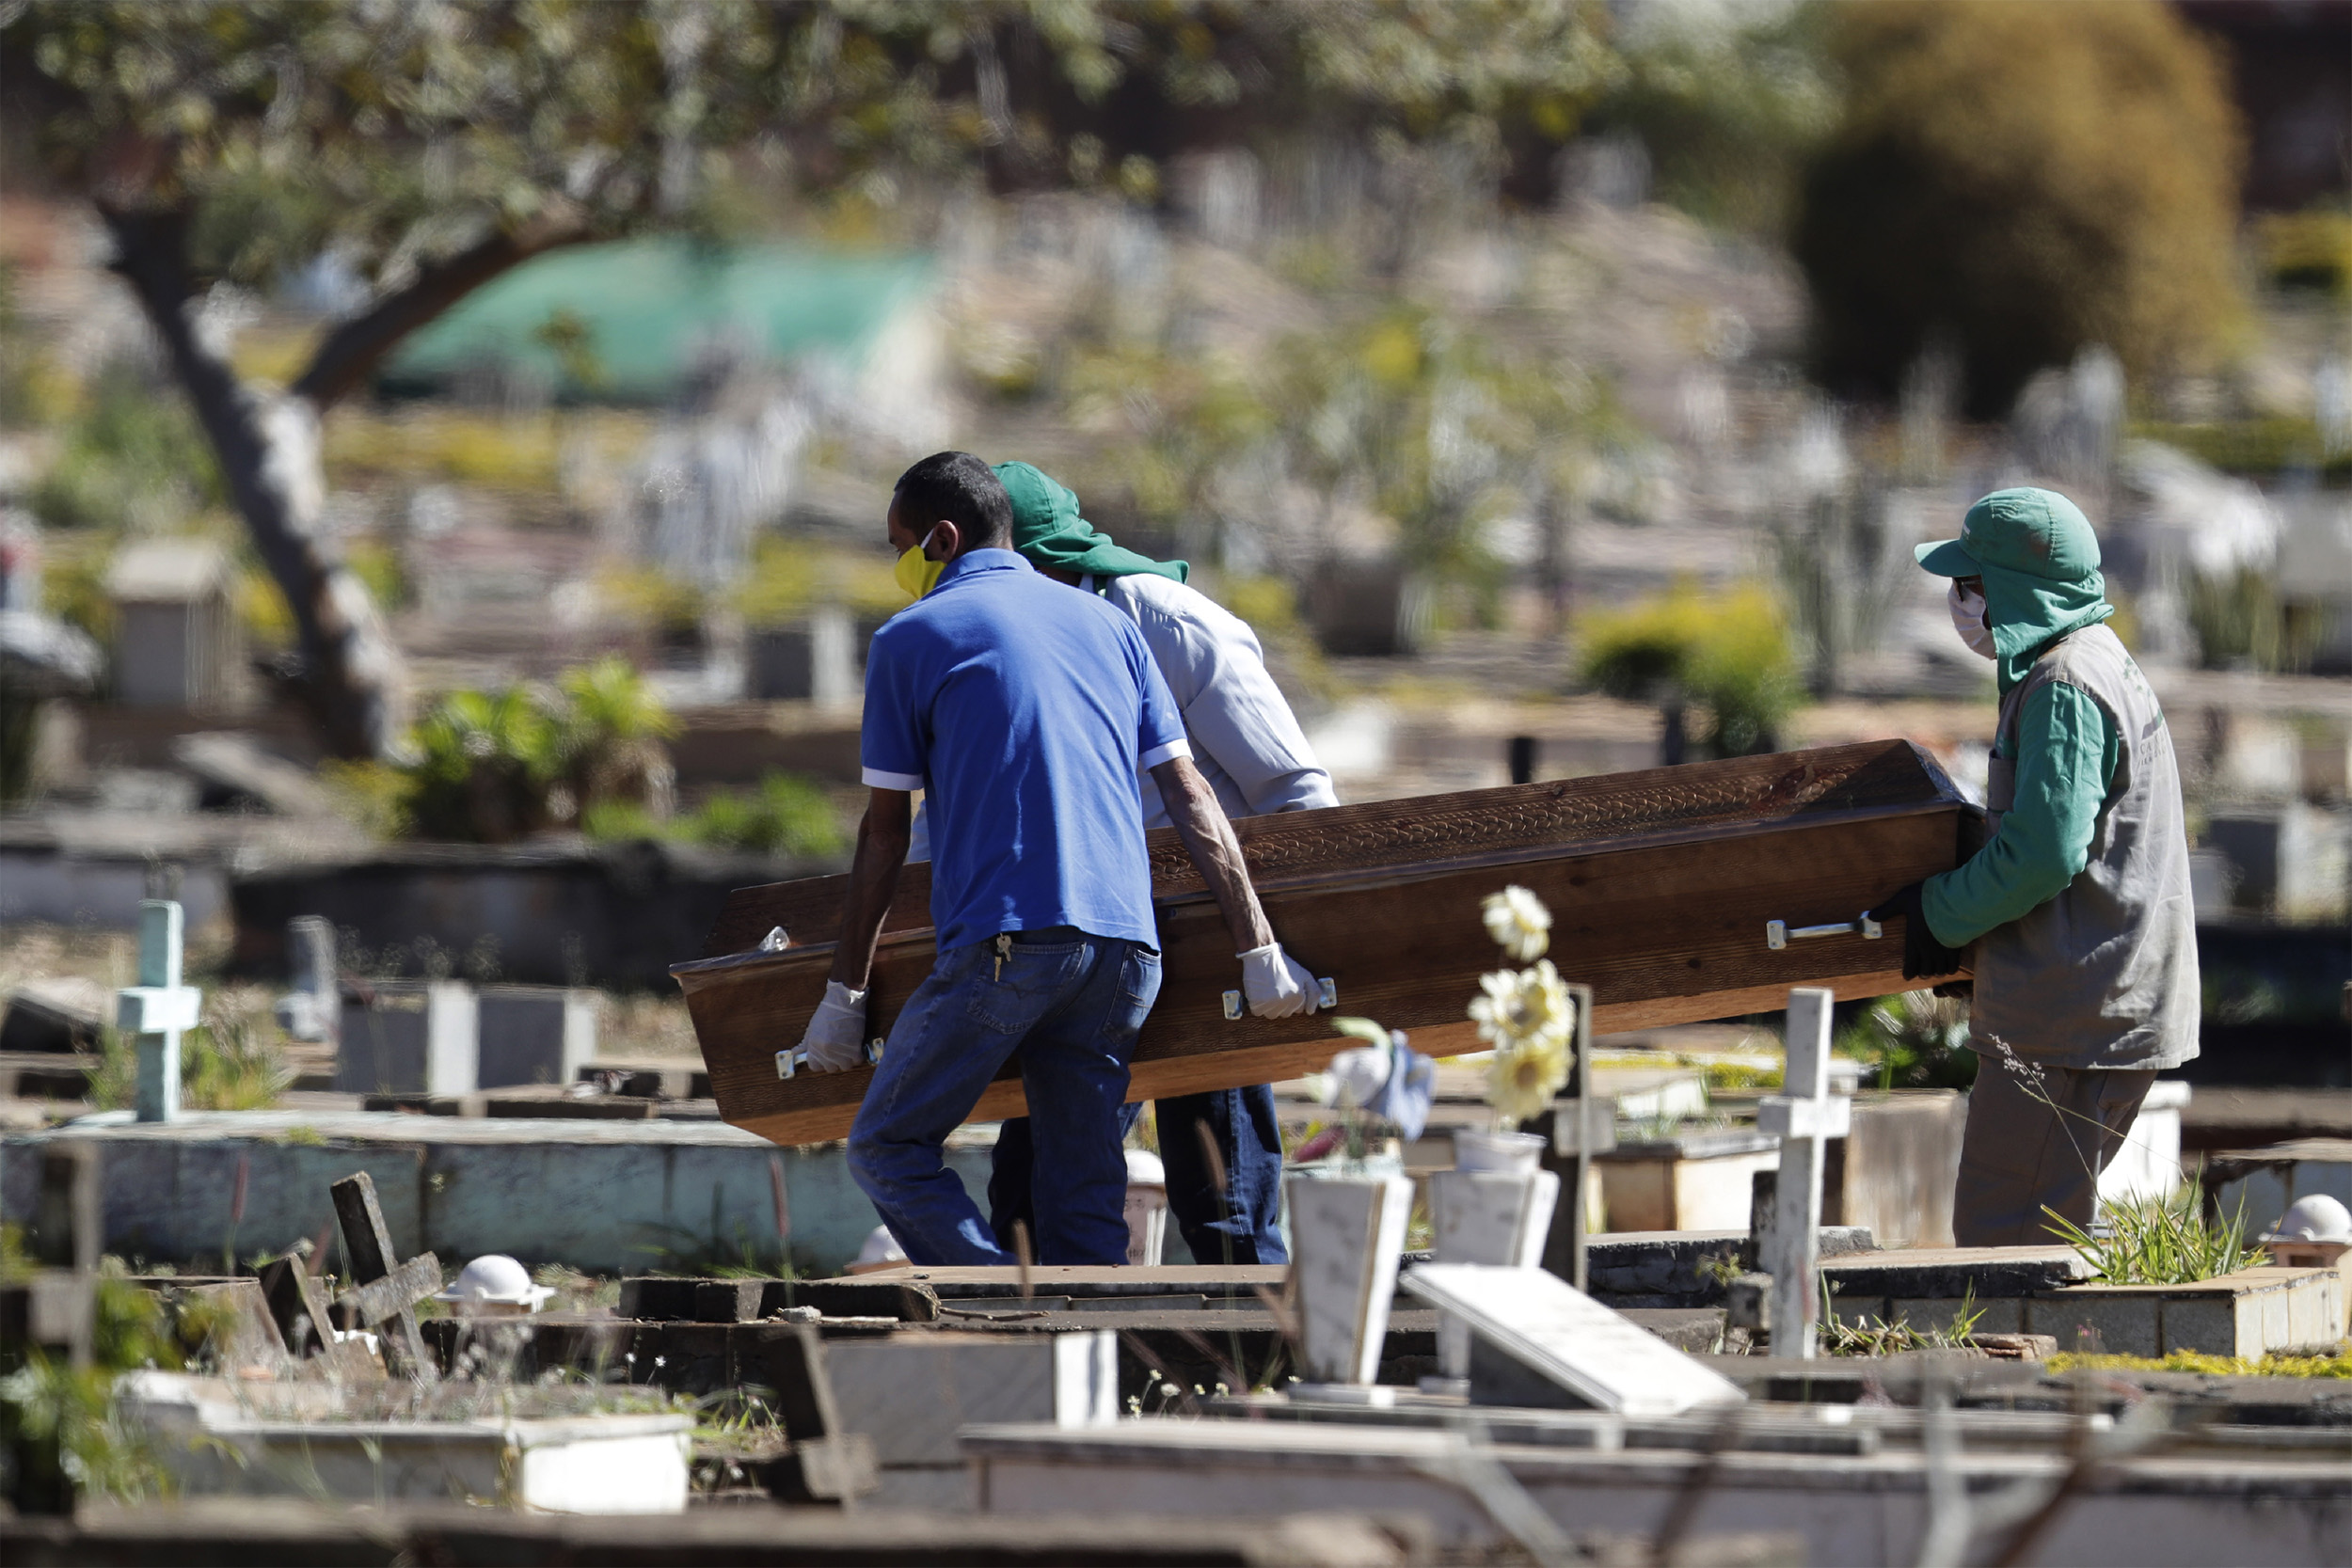 Cemetery workers carry the coffin of Bruno Correia, whose family said he died of COVID-19, to his gravesite at the Campo da Esperanca cemetery in Brasilia, Brazil, on Friday, July 17.